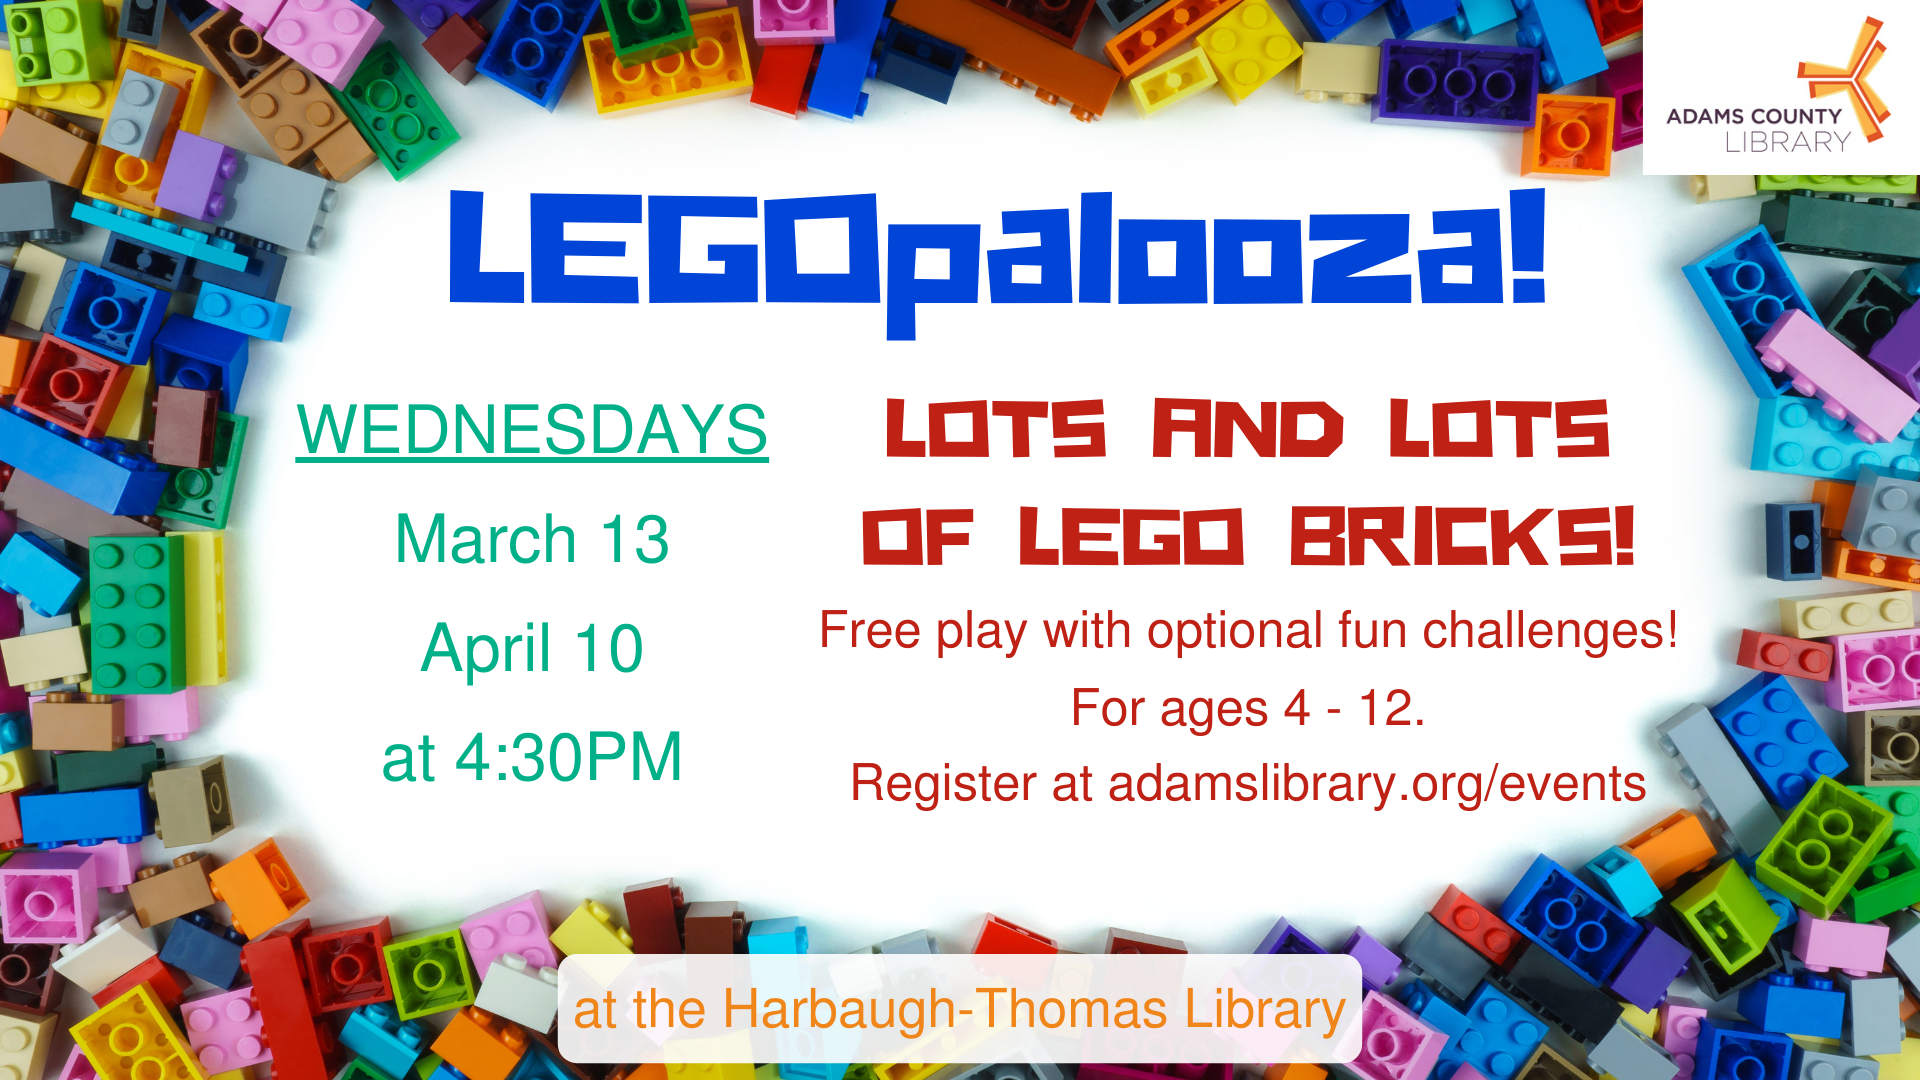 LEGOpalooza! WEDNESDAYS, MARCH 13 / APRIL 10  4:30PM Ages 4-12. Lots and lots of LEGO bricks. Free play with optional fun challenges.